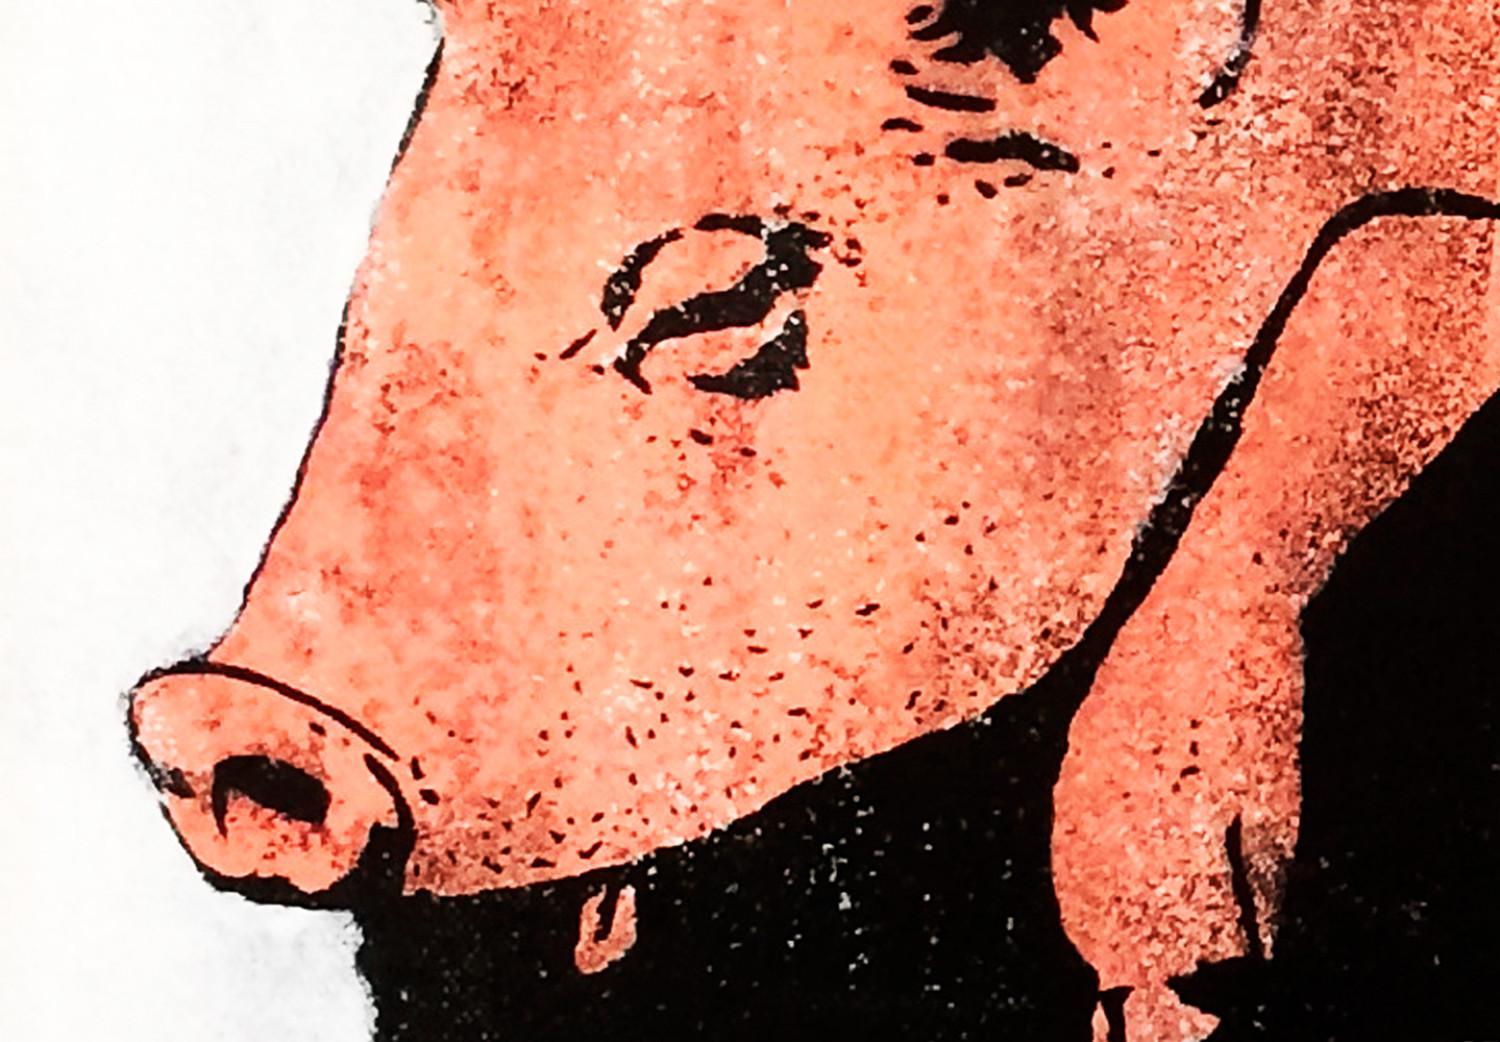 Poster Police Pig - policeman holding a sleeping pink piglet